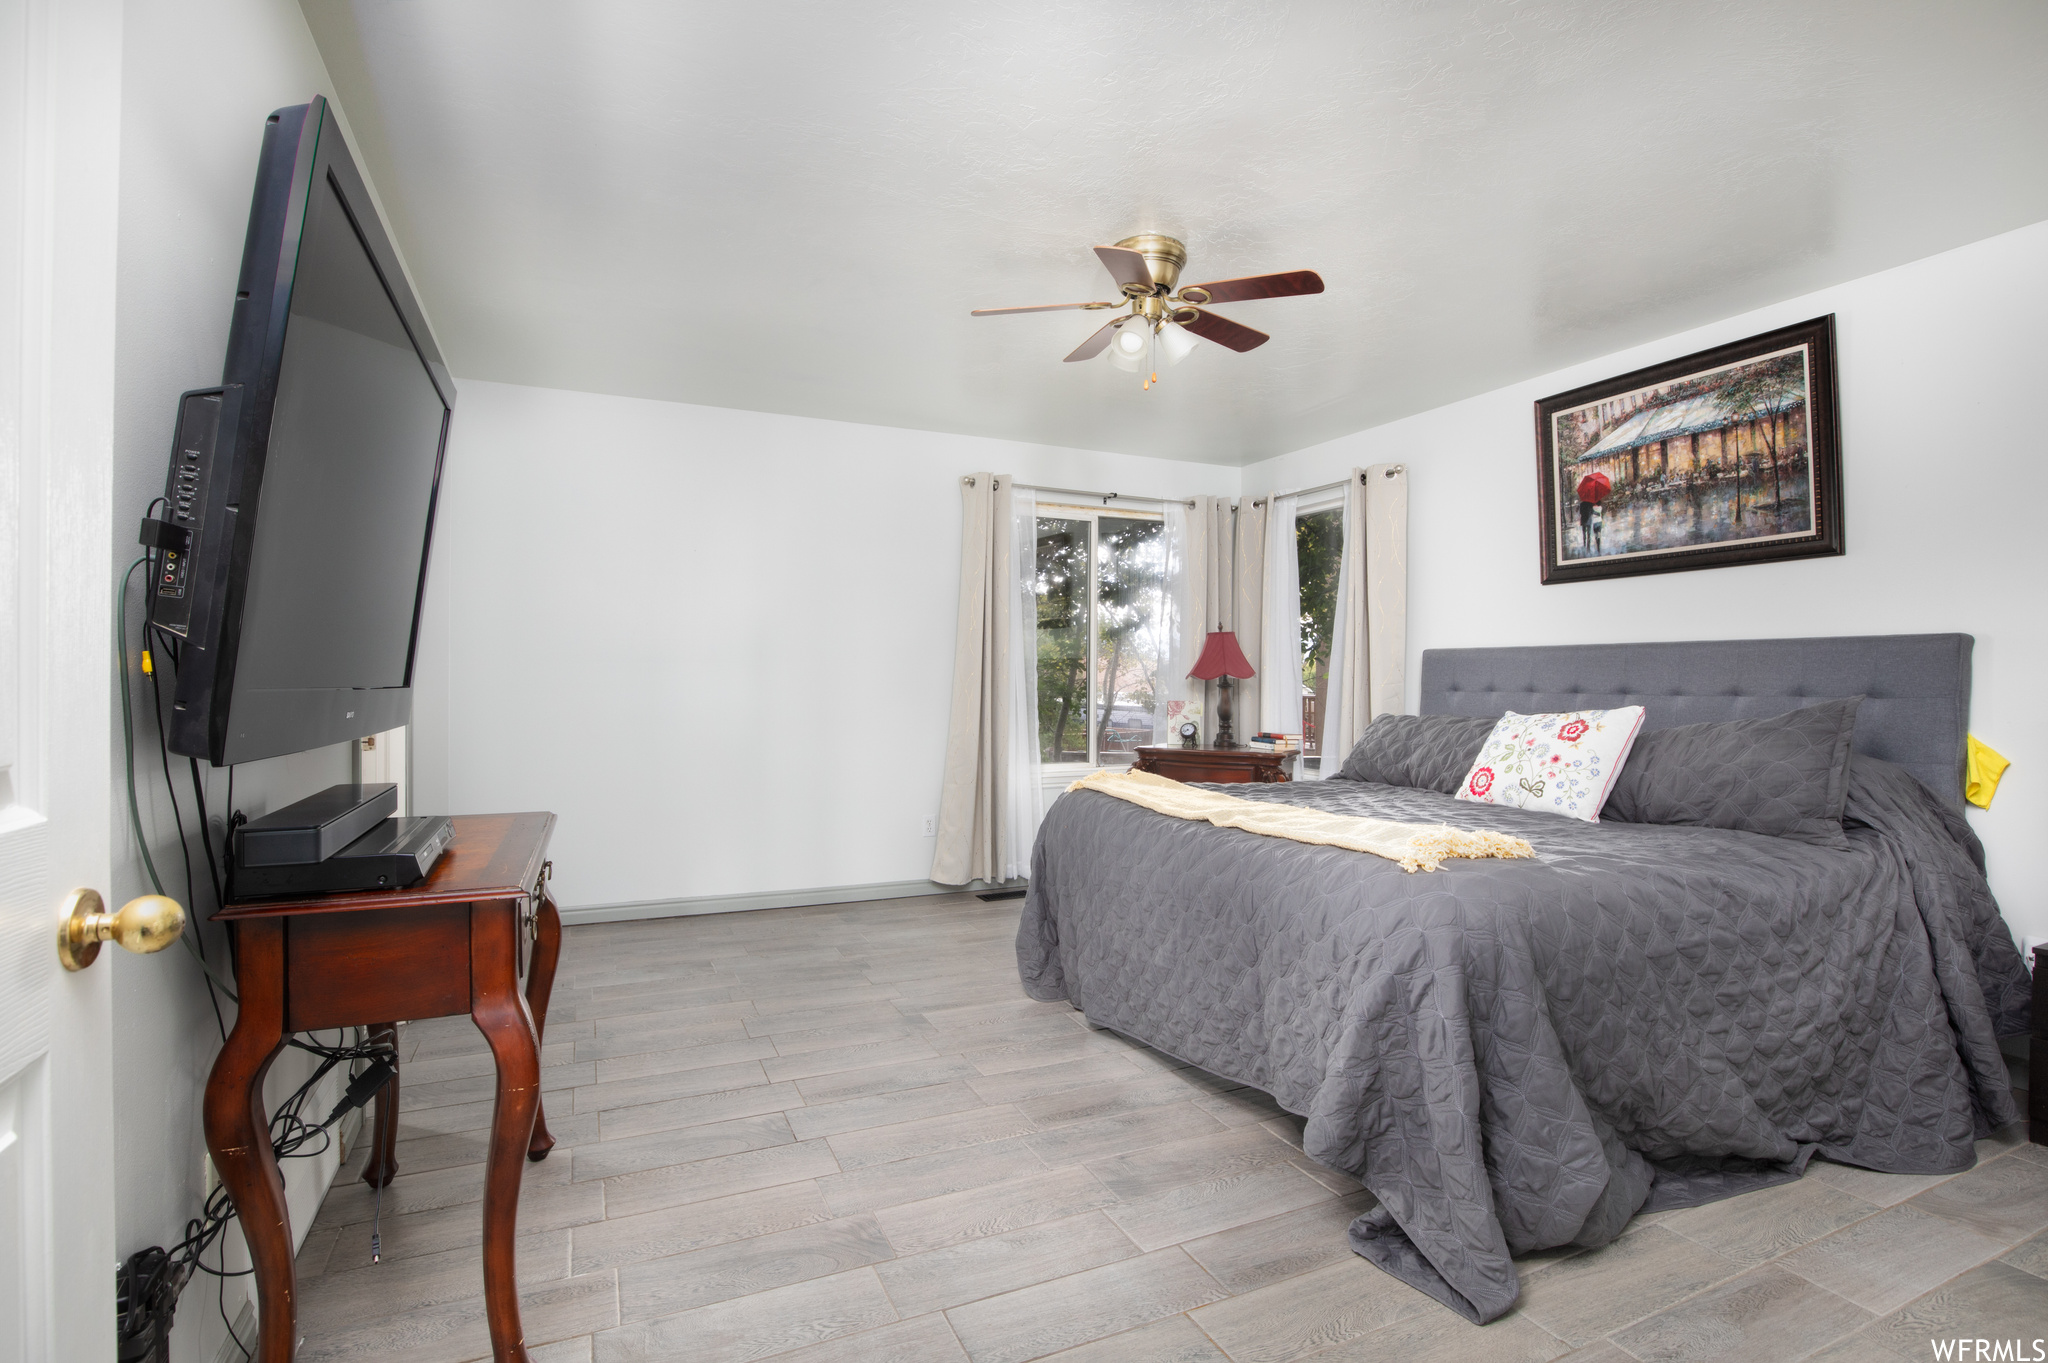 Main bedroom with light tiled floors and ceiling fan.